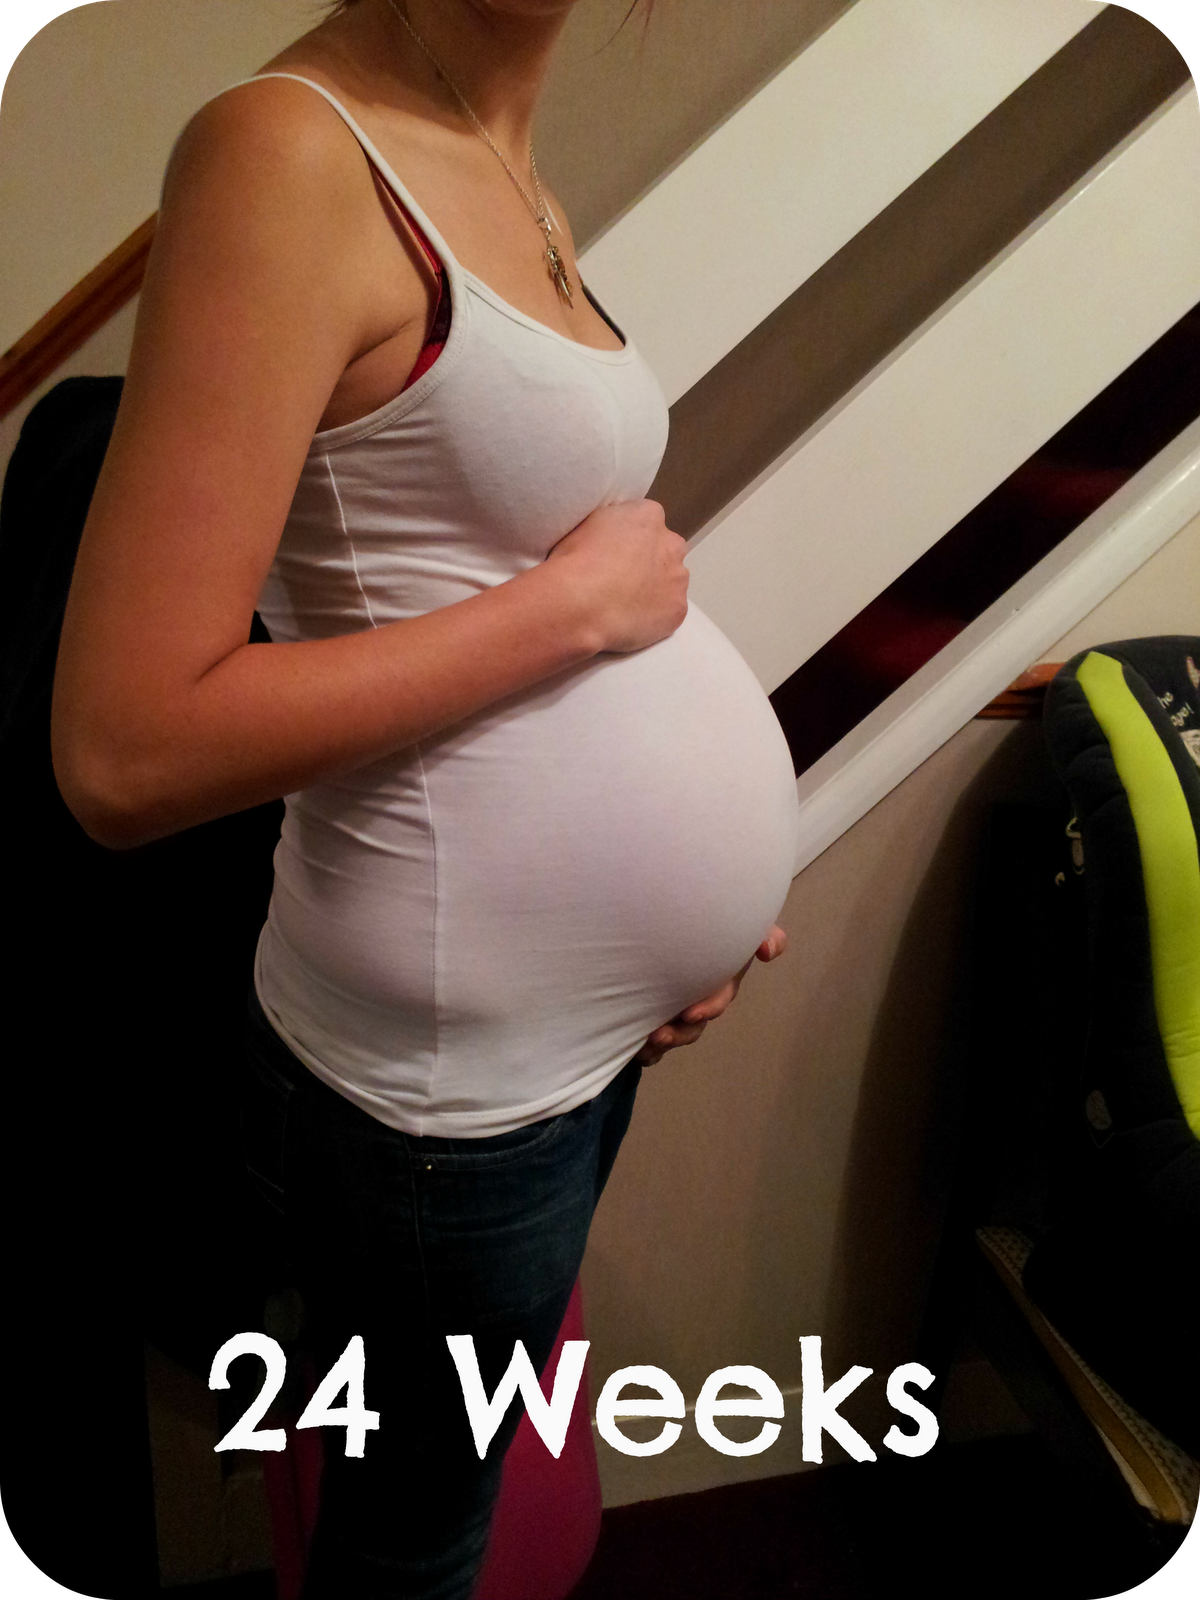 The Adventure of Parenthood: 24 Weeks Pregnant